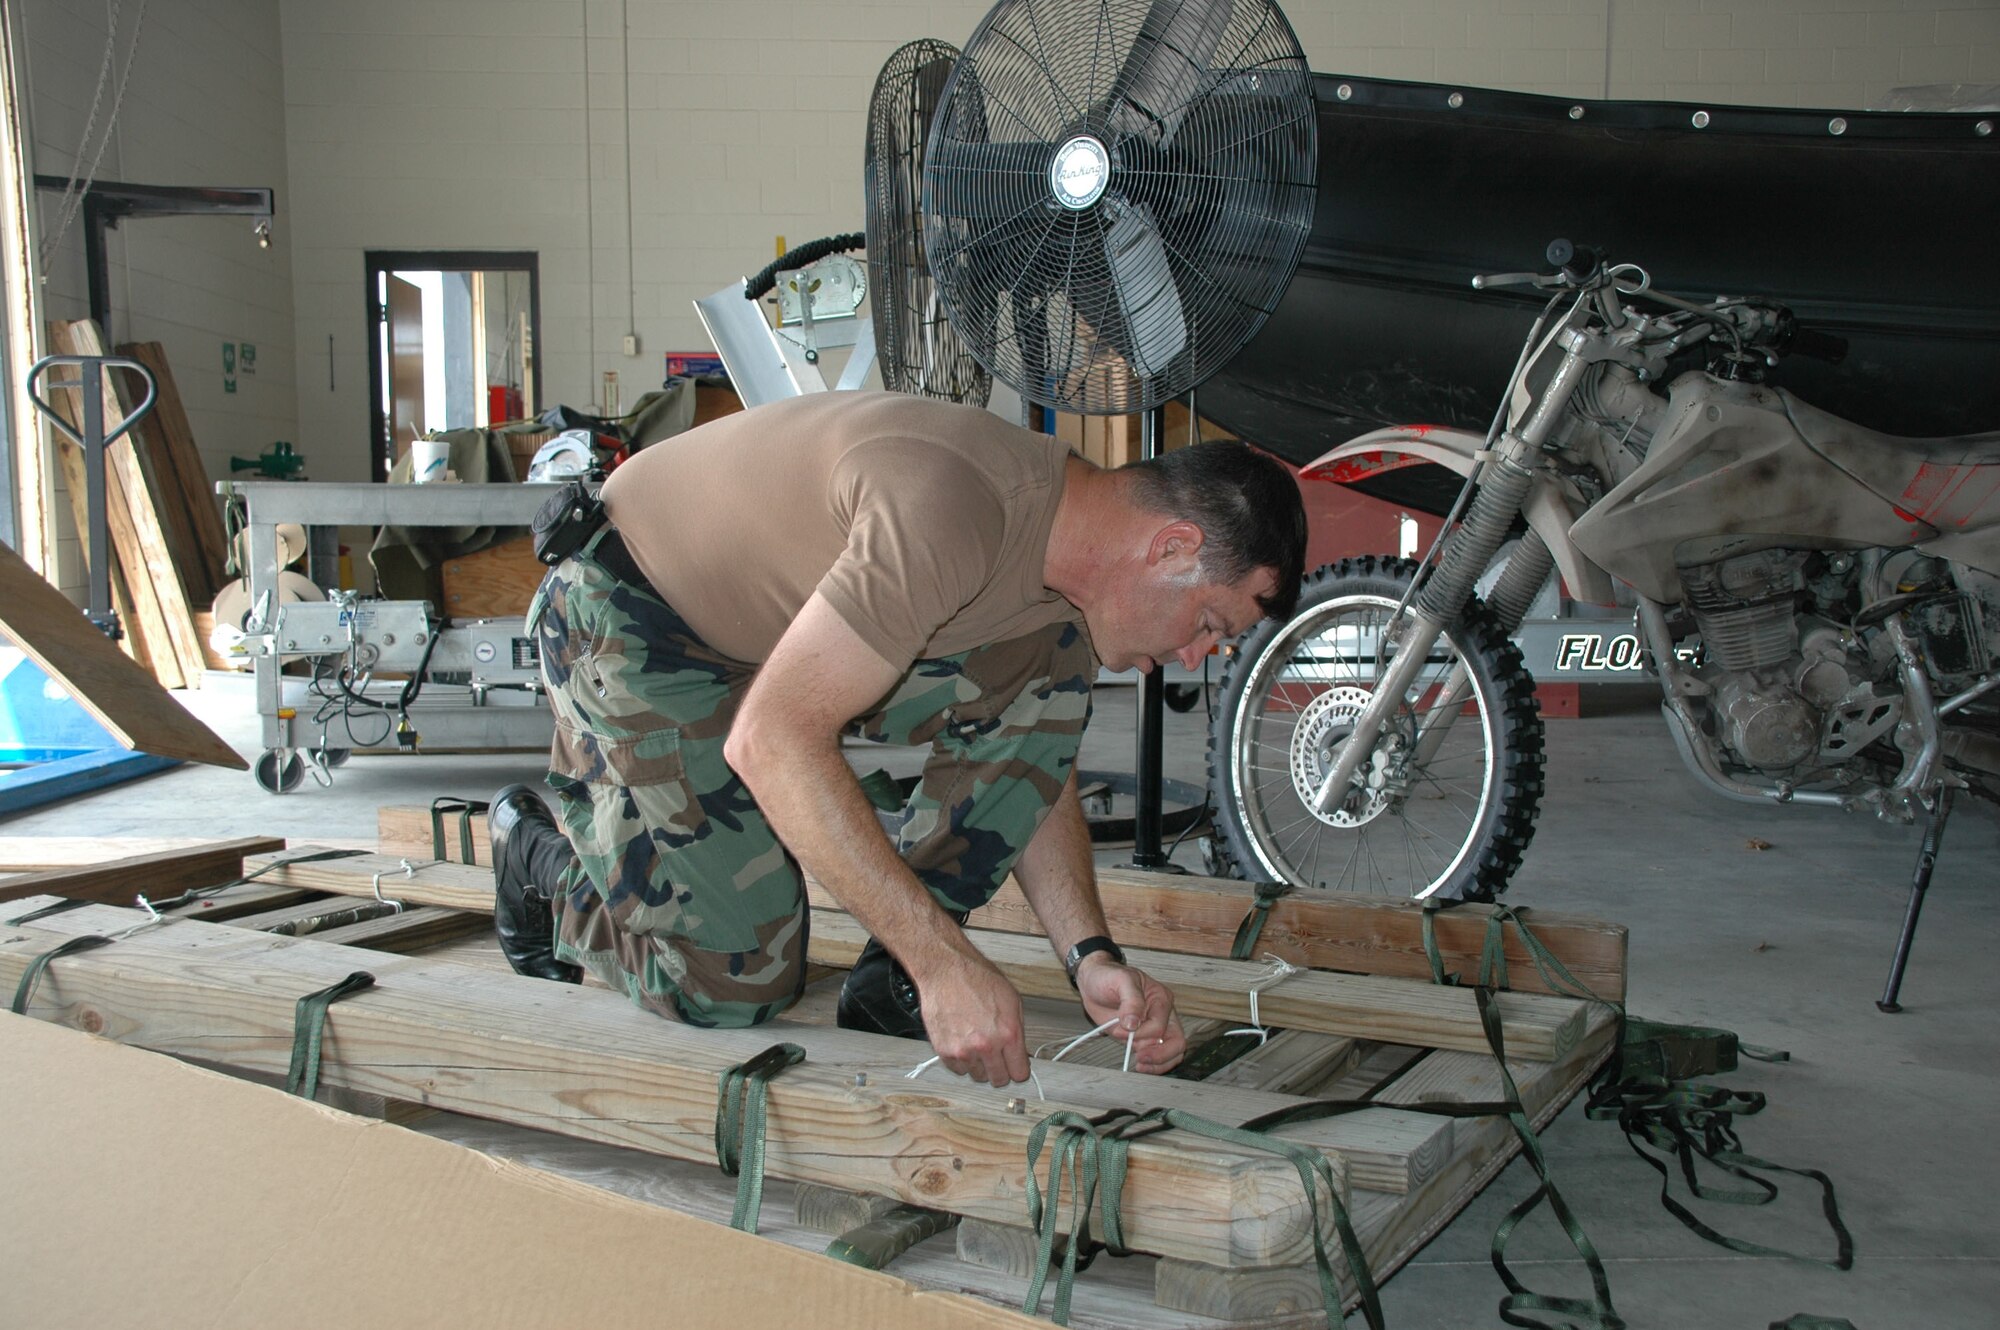 Rescue Reservist Tech. Sgt. Michael Fuller, 920th Rescue Wing Life Support Technician, assembles a four-wheeler quad bundle at Patrick Air Force Base, Fla., to ready it for airdrop from an HC-130P/N Extended-Range Hercules aircraft.  The quad will deploy along with pararescuemen (PJs) from the back of the aircraft as part of pararescue jump training.  PJs train extensively using a variety of equipment to for  rescuing isolated personnel behind enemy lines during wartime.  Sergeant Fuller and other life support personnel like him, are vital in readying life-saving equipment.  Each quad bundle takes approximately 4 hours to build. (U.S. Air Force Photo/1st Lt. Jaime Pinto)